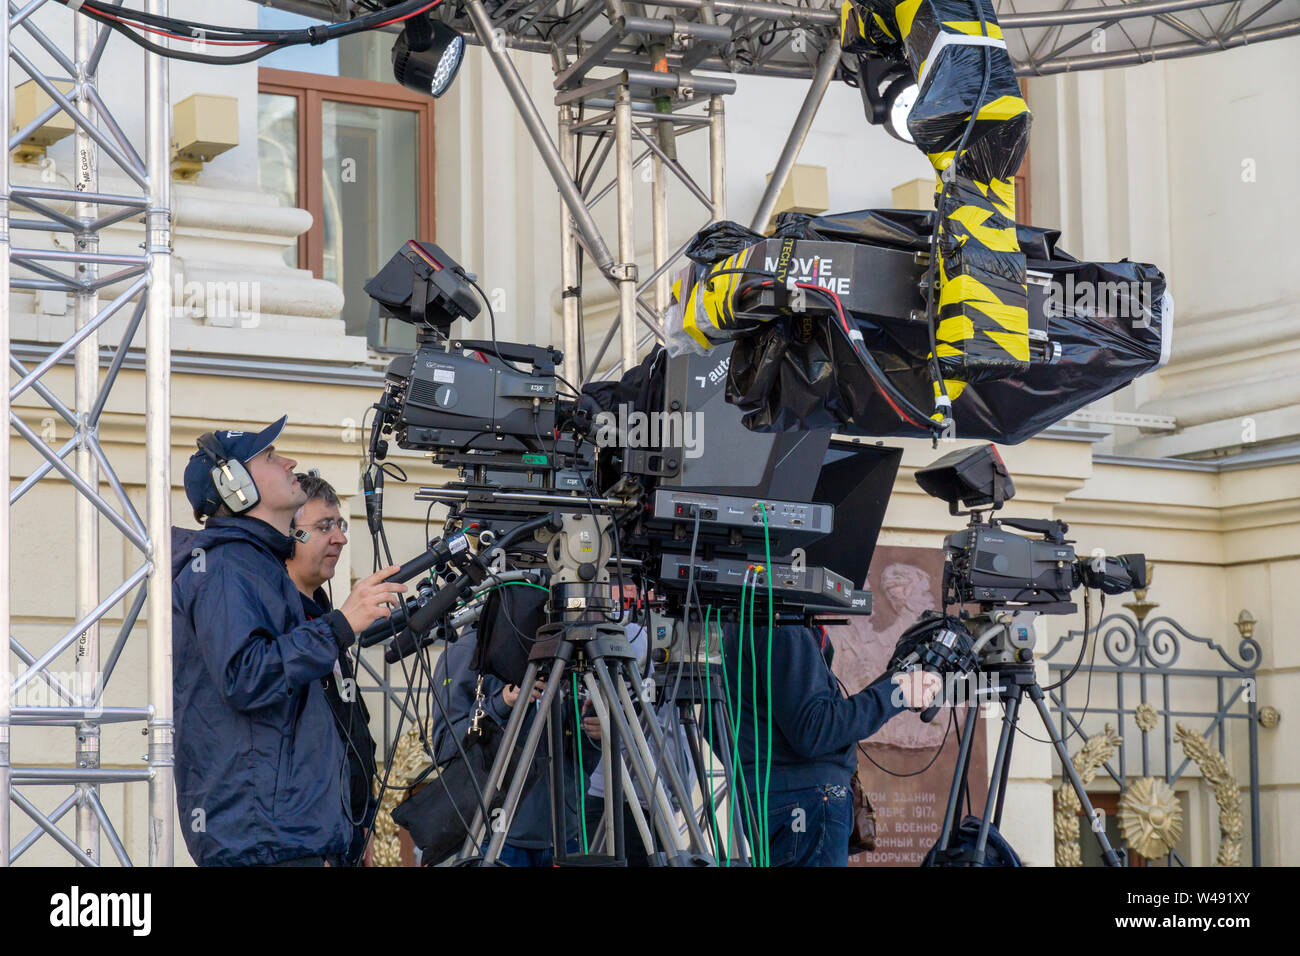 MOSCOW, RUSSIA - MAY 9, 2019: Recording TV program during the Victory Day Parade. TVC channel cameraman Stock Photo